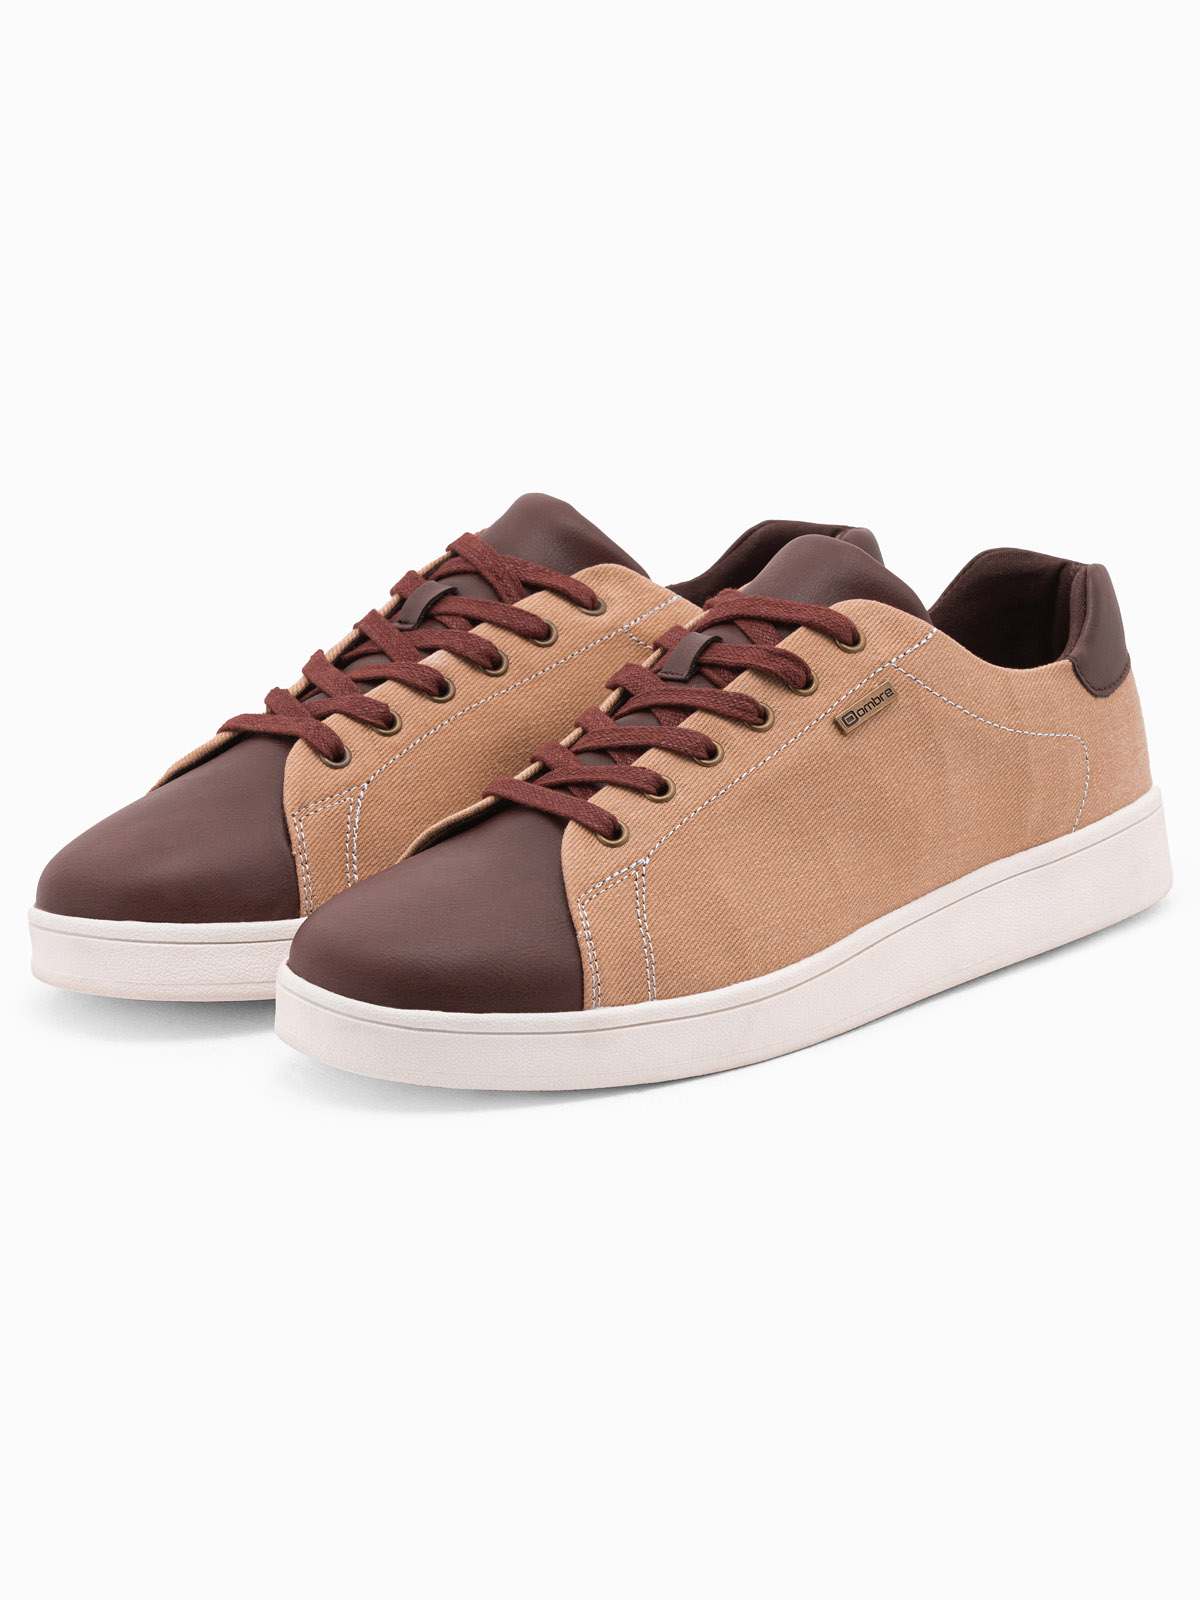 Ombre Men's shoes sneakers with combined materials - brown